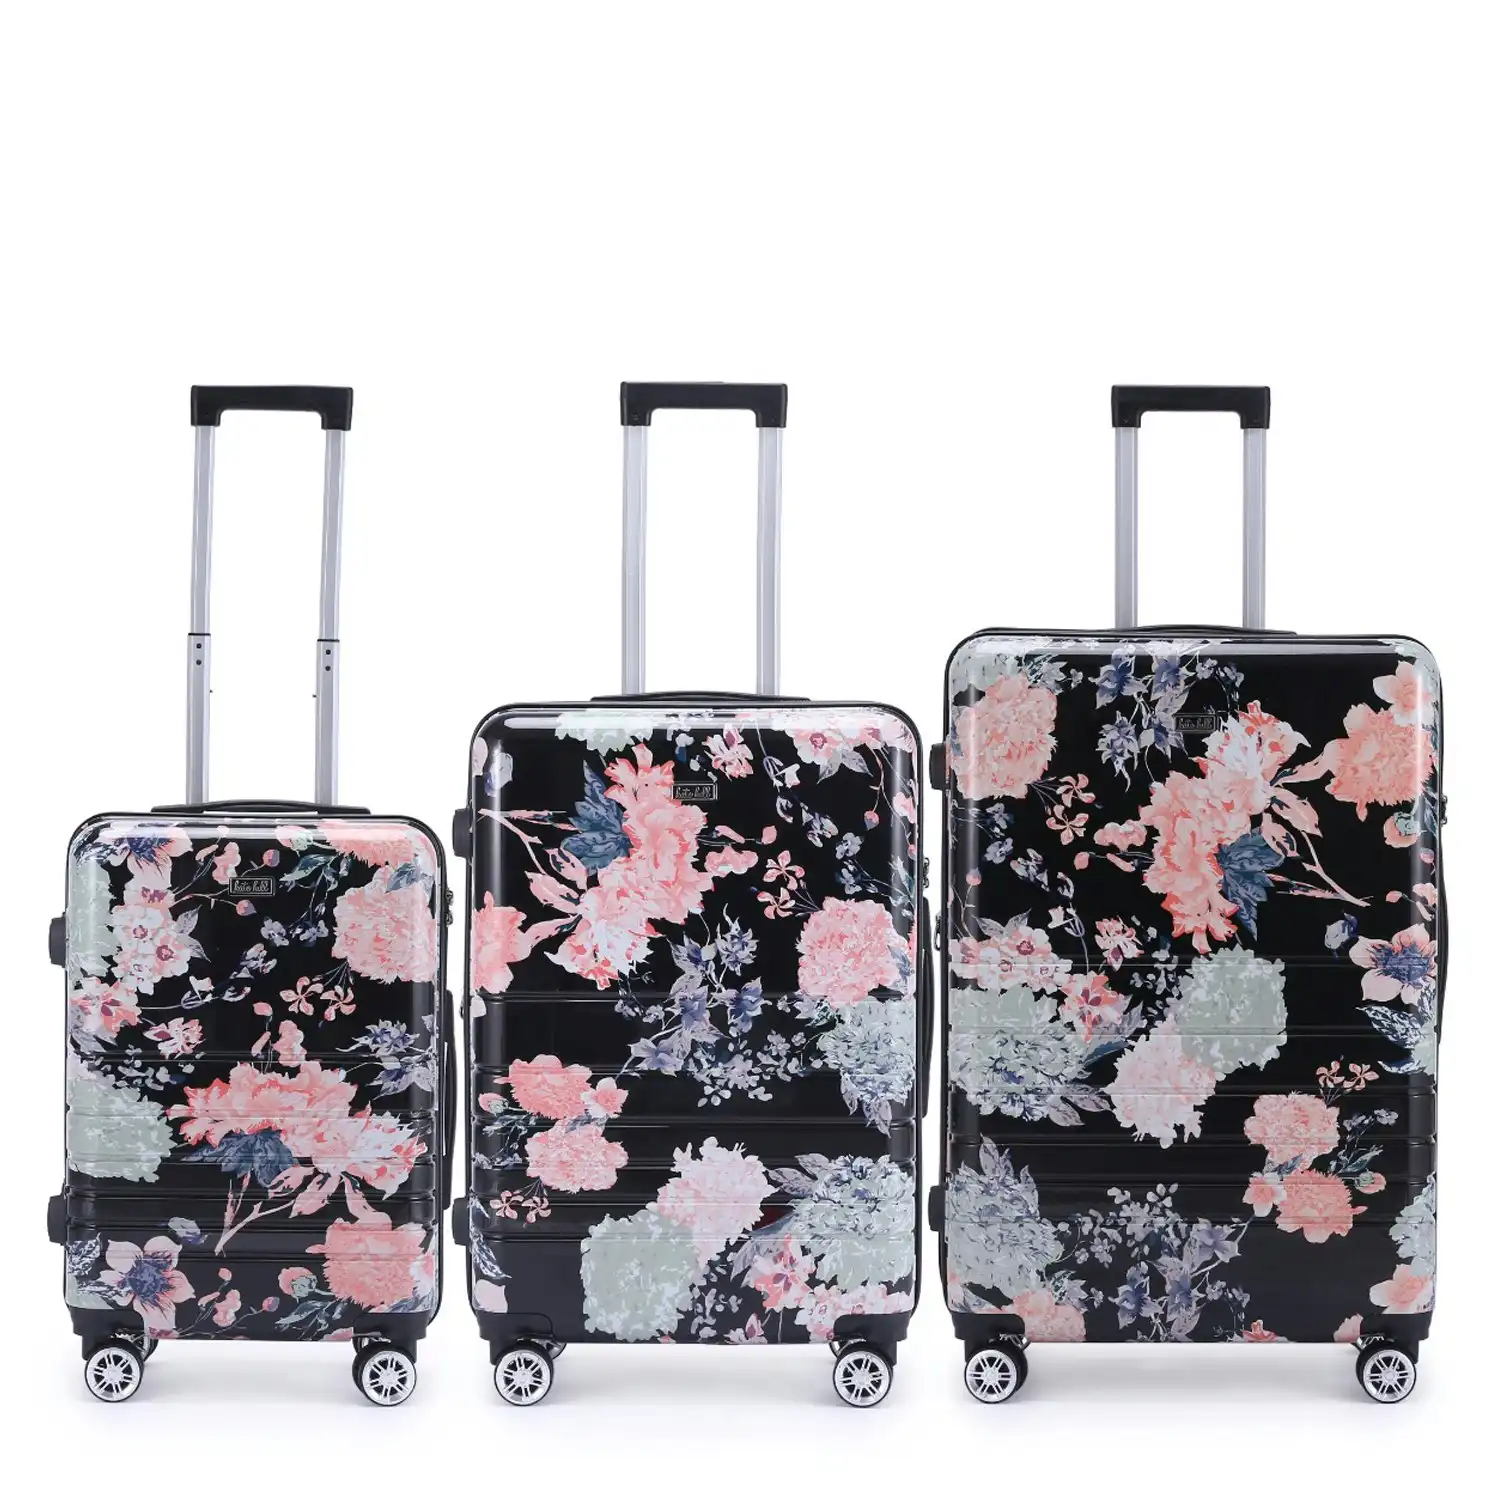 3pc Kate Hill Bloom Wheeled Trolley Hard Suitcase Luggage Set Floral S/M/L